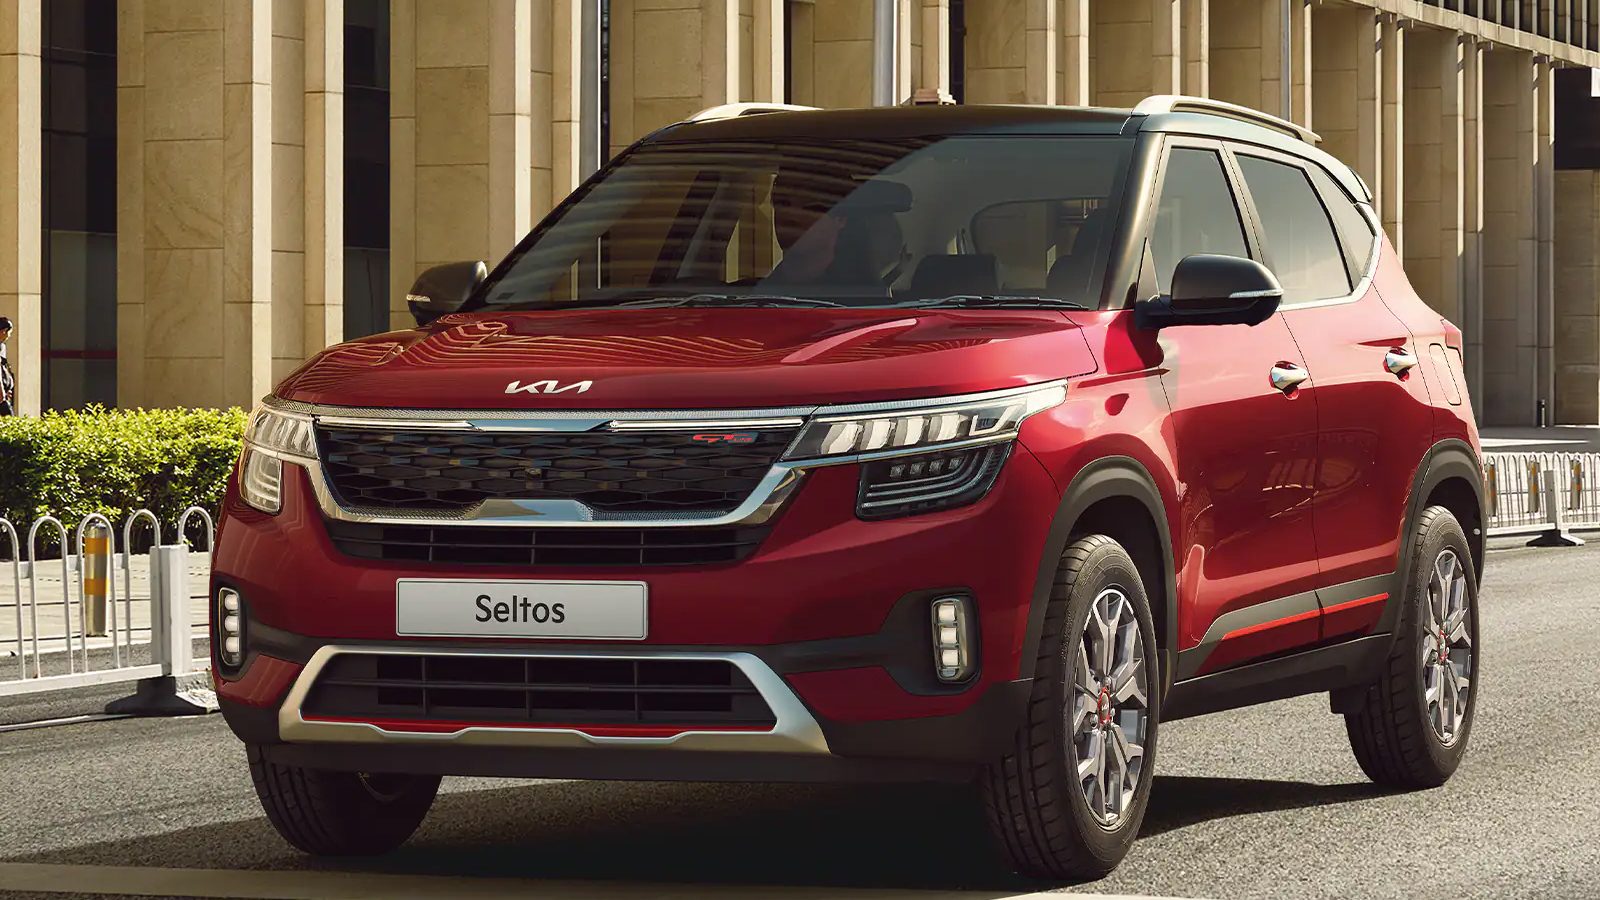 Kia Seltos 2022 Variants Explained: How to Choose the Best Model for ...